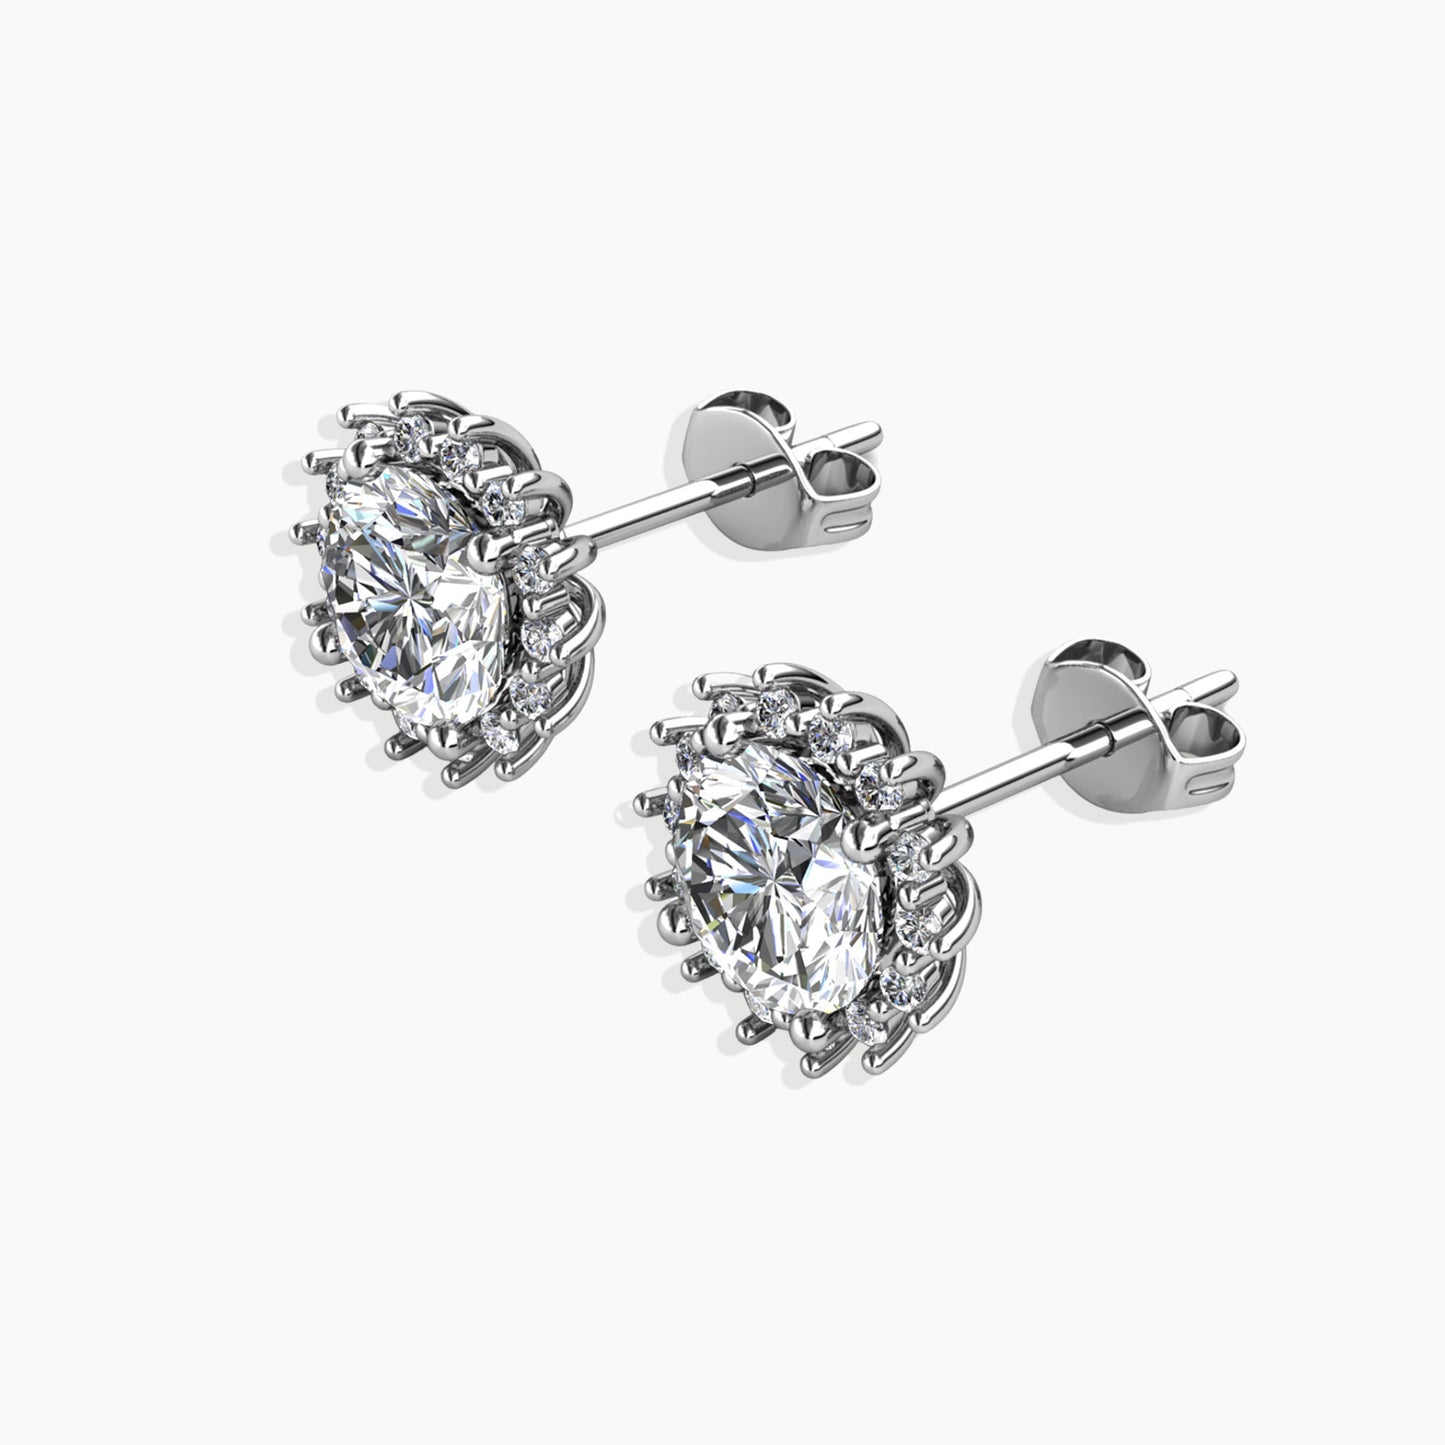 Moissanite 1ct. Circle studs in Sterling Silver